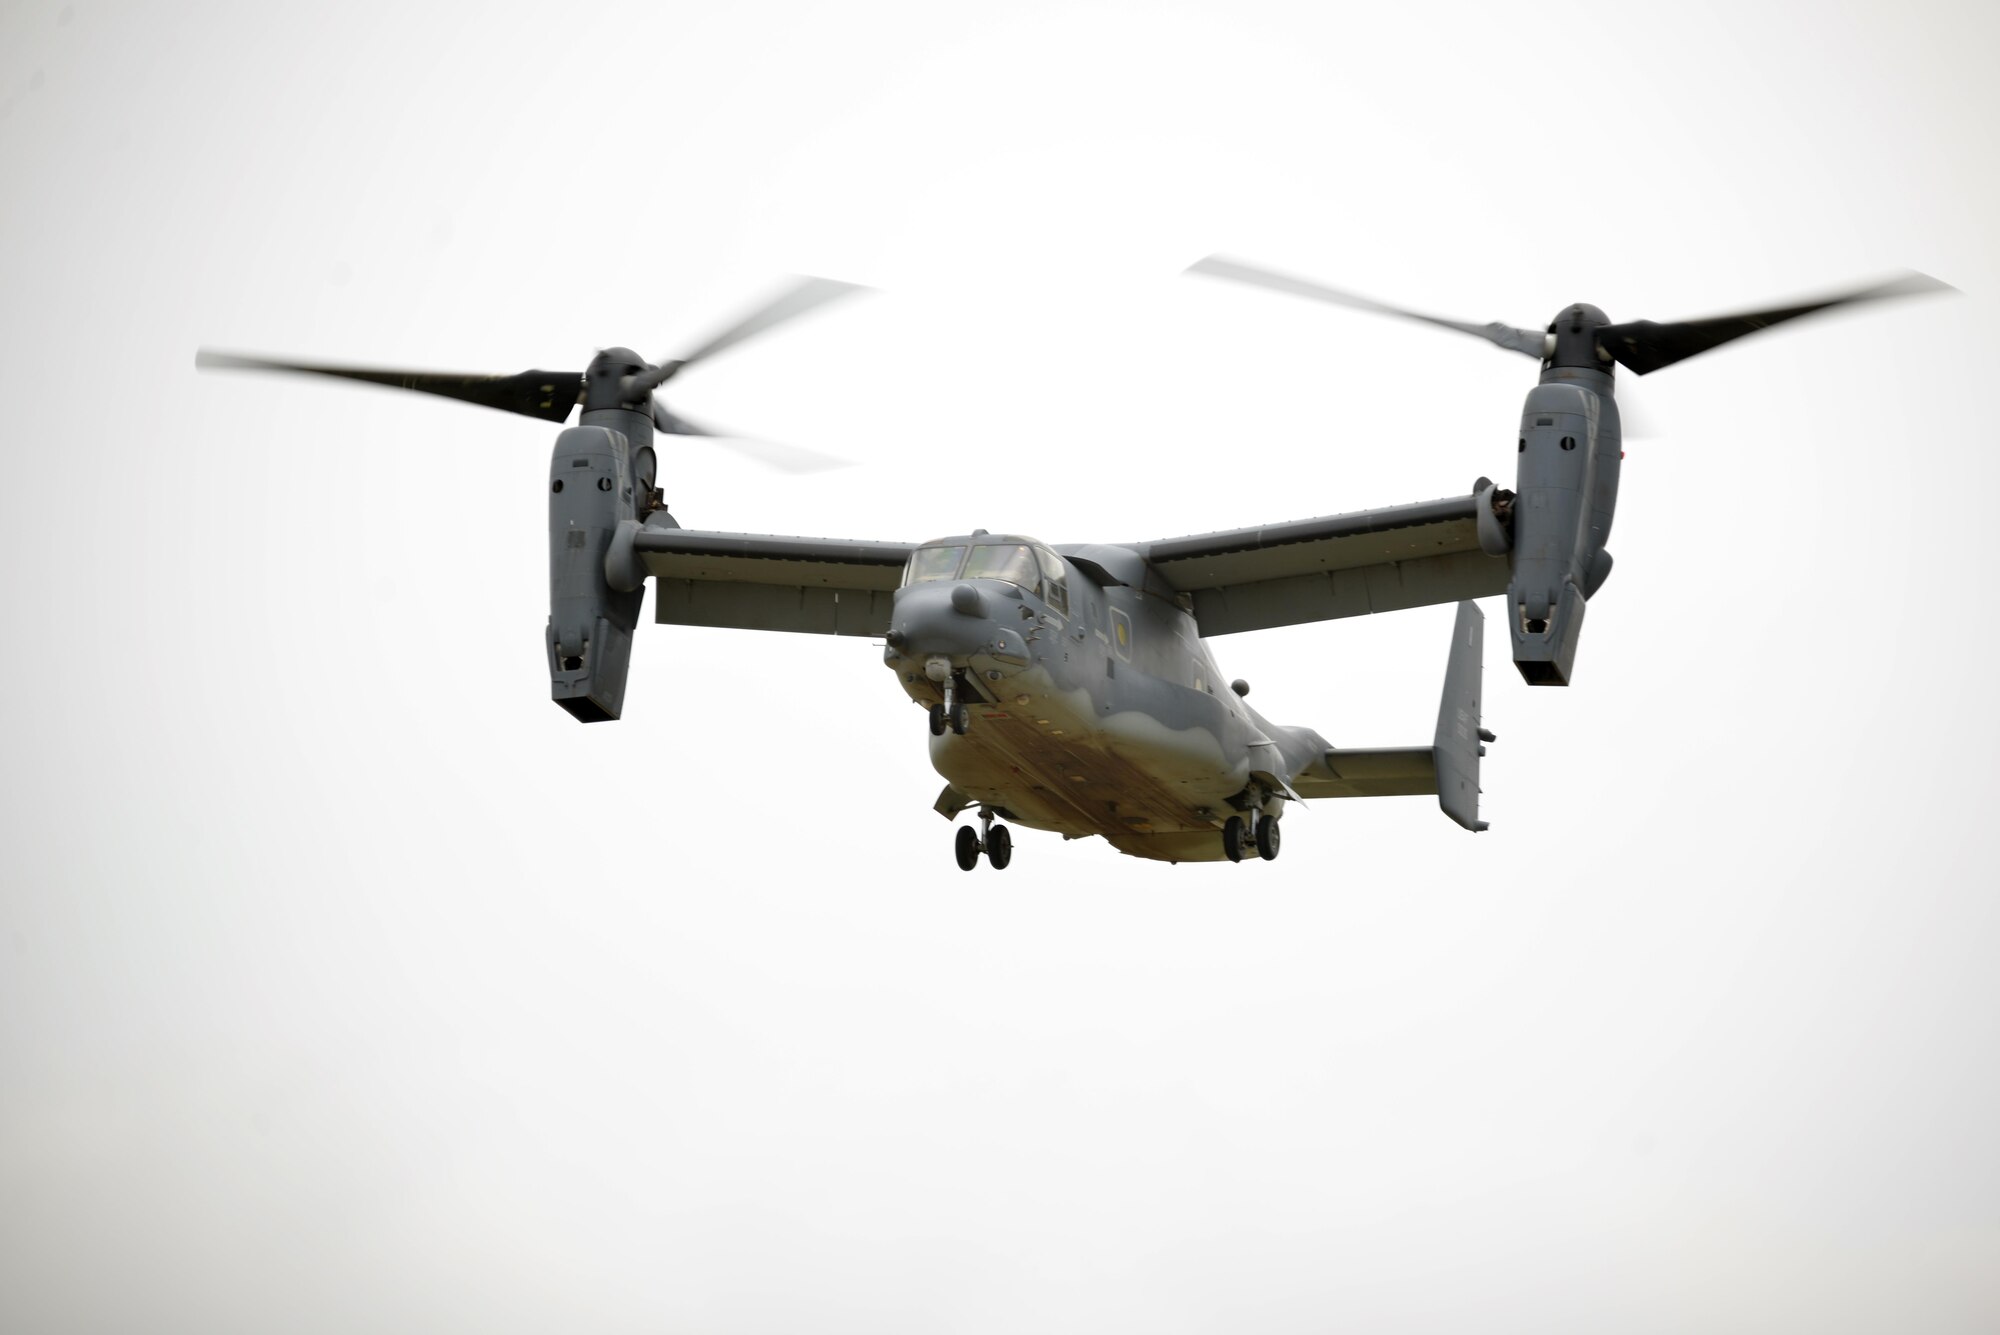 A CV-22 Osprey from Cannon Air Force Base, New Mexico, prepares to land on Goodfellow Air Force Base, Texas, May 30, 2017. The CV-22 Osprey is a tilt rotor aircraft that is capable of the take-off and landing qualities of a helicopter with the fuel efficiency and speed of a turboprop aircraft. Its mission is to conduct long-range infiltration, exfiltration and resupply missions. (U.S. Air Force photo by Airman 1st Class Randall Moose/Released)